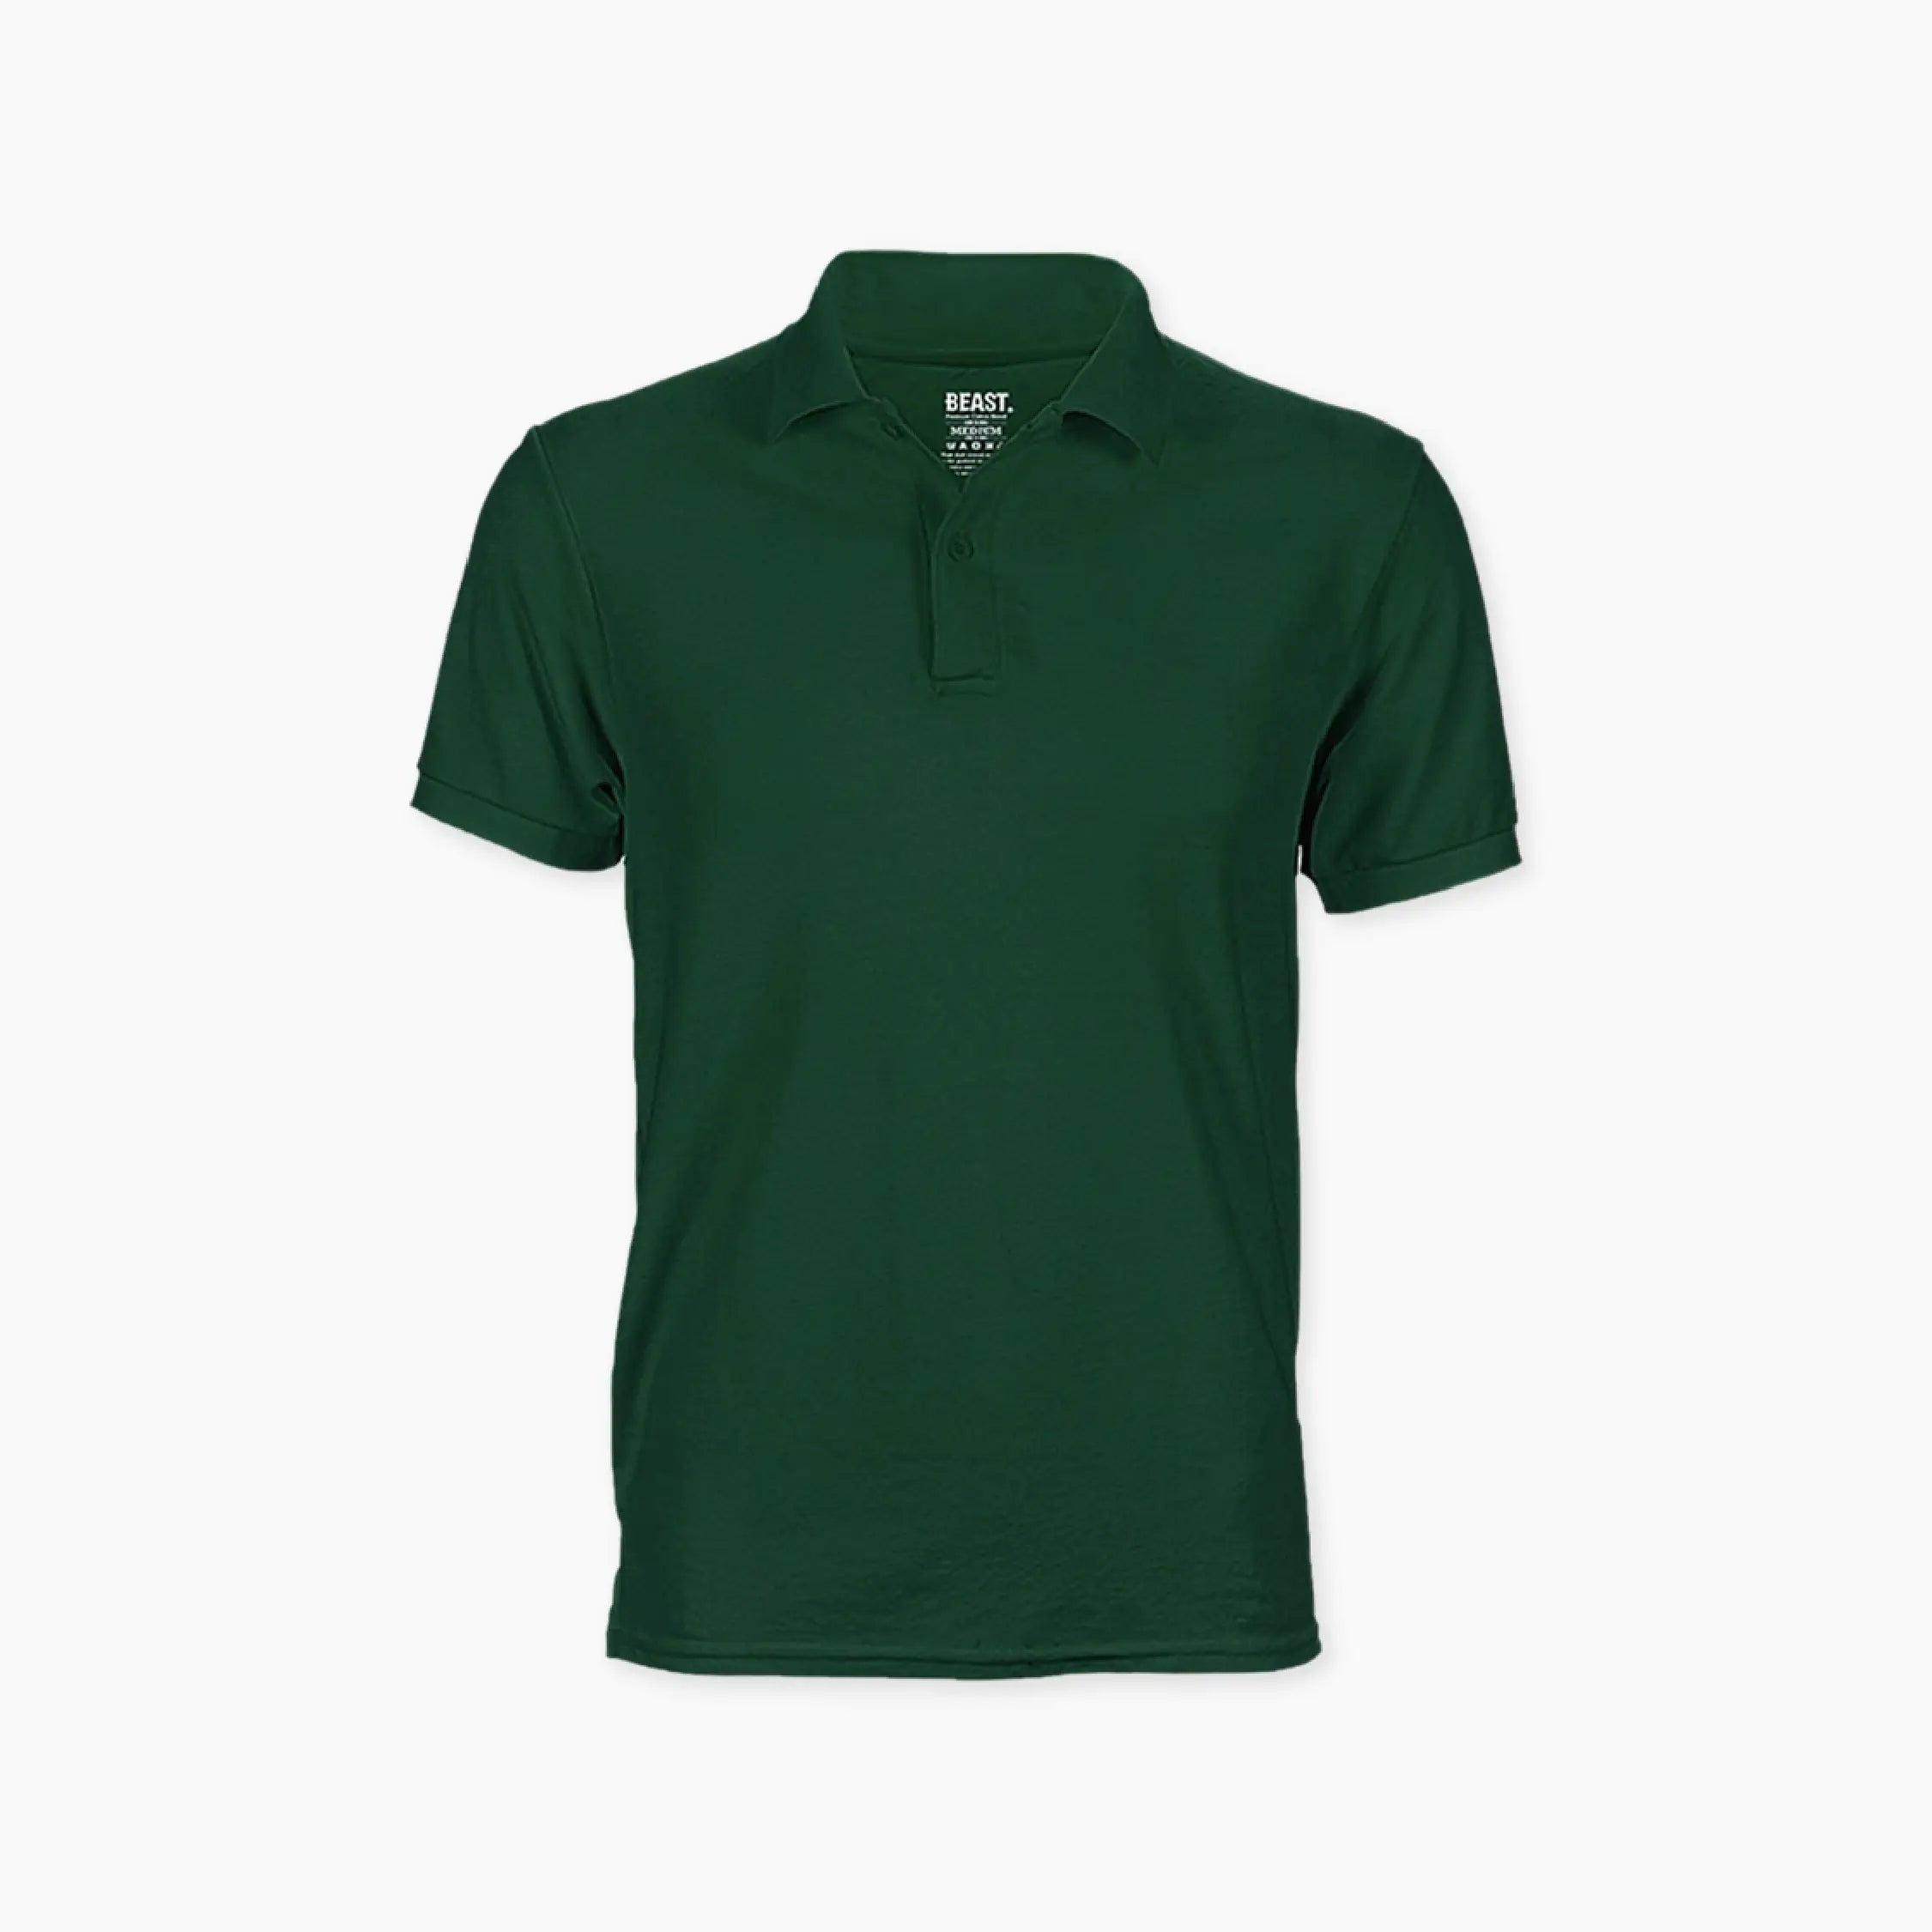 beast-forest-green-polo-t-shirt